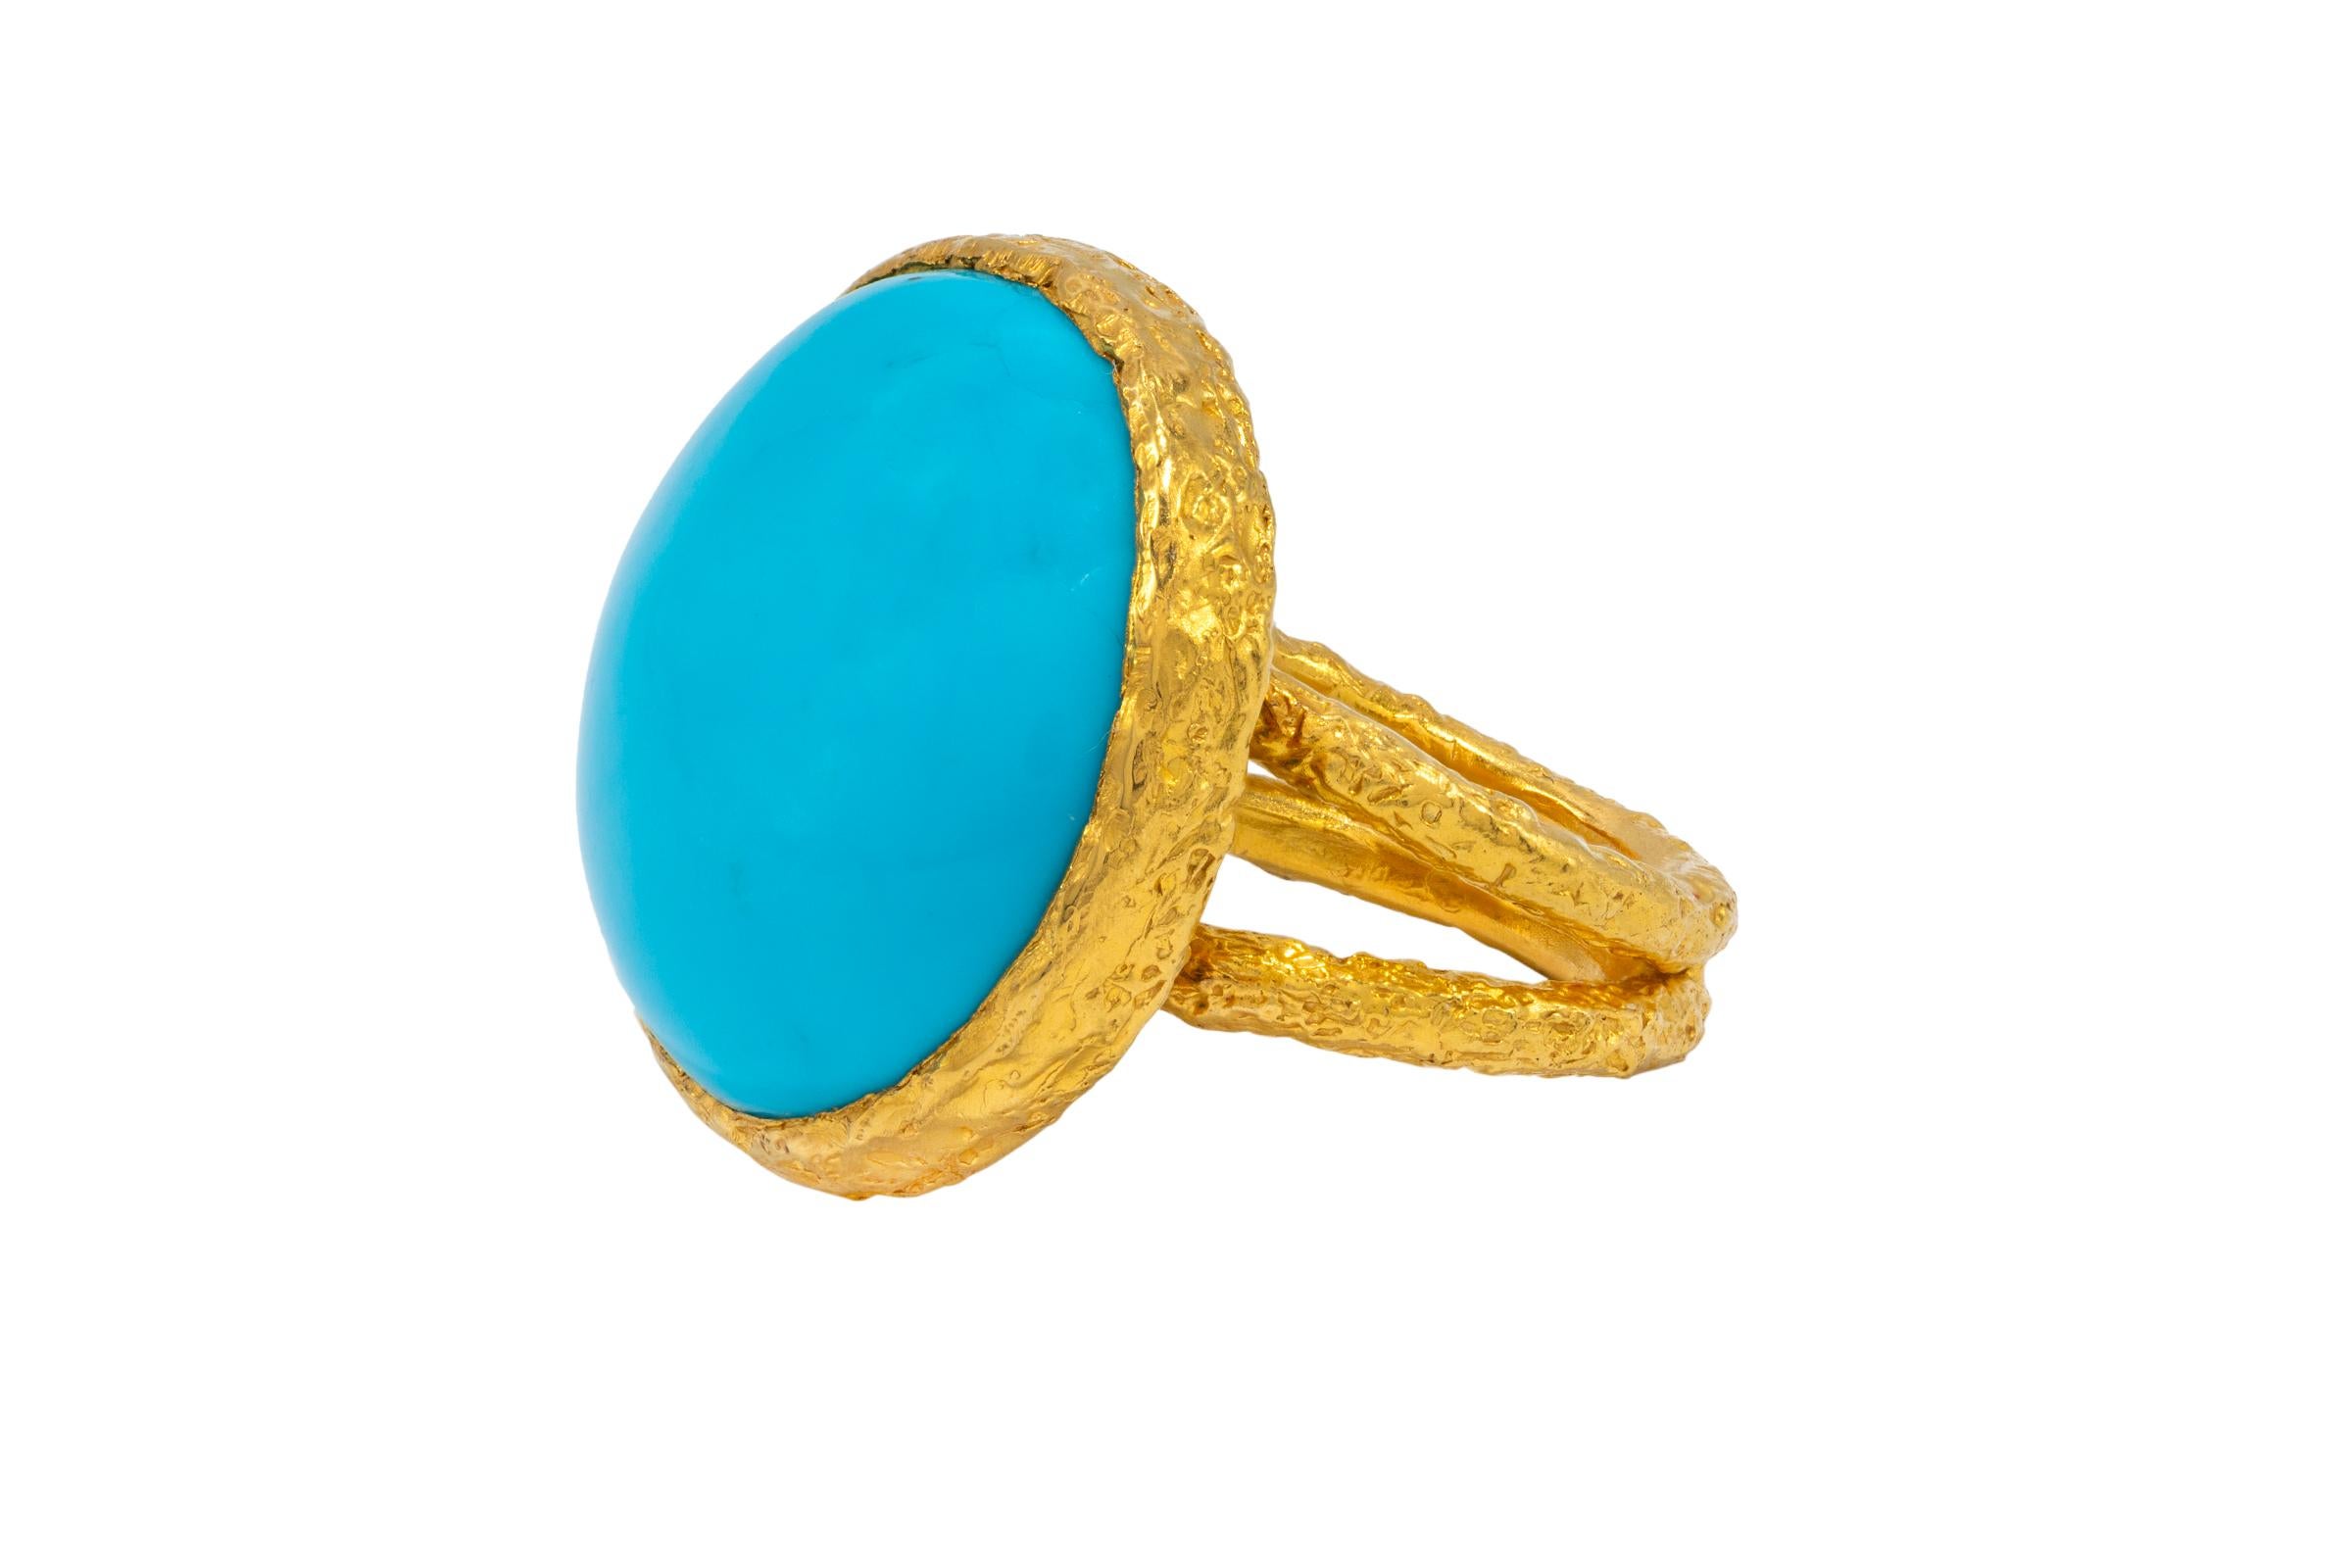 22k Gold Summer Signature Cocktail Ring featuring a beautiful large round turquoise stone surrounded by an organically textured bezel. With the combination of Tagili’s signature finish and the vibrant color of turquoise blended together,